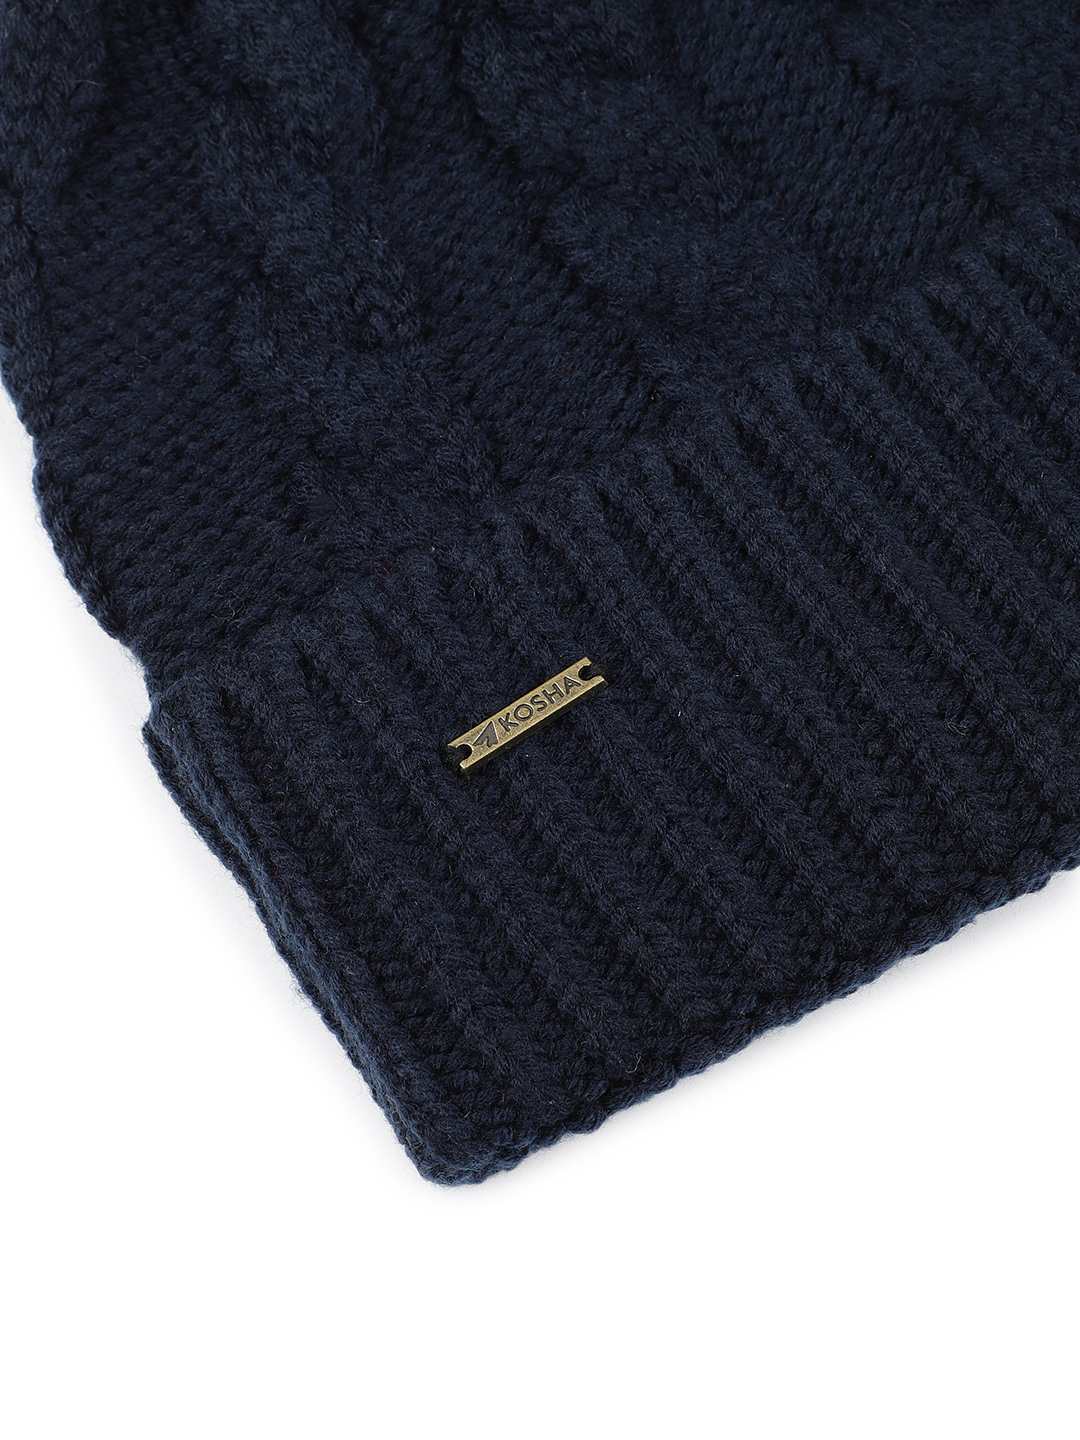 Navy Blue Acrylic Wool Cable Knit Winter Beanie | Men